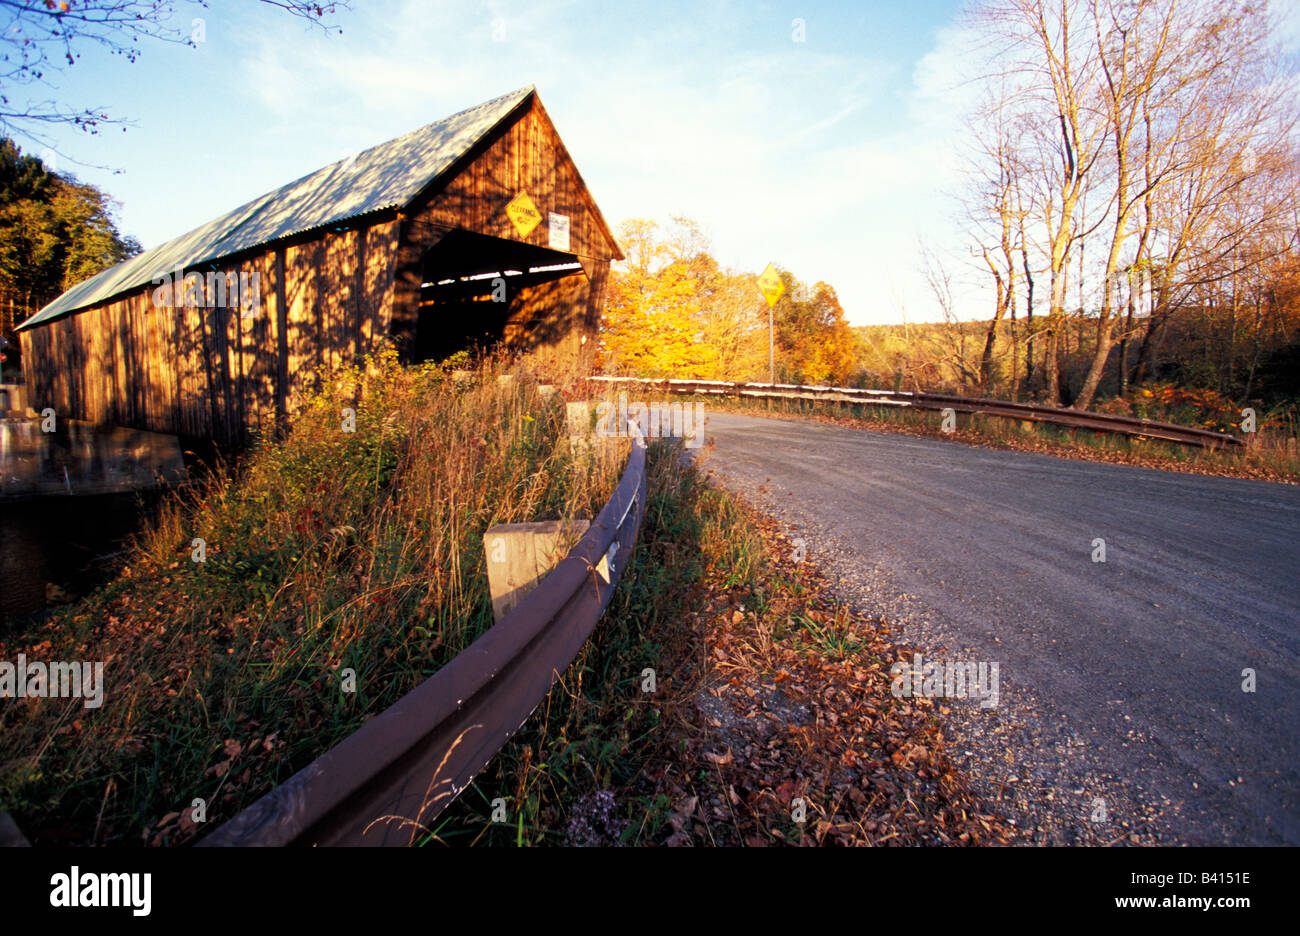 North America, United States, Vermont, Woodstock. The Lincoln Covered Bridge built in 1877 in the Pratt Truss style. Stock Photo